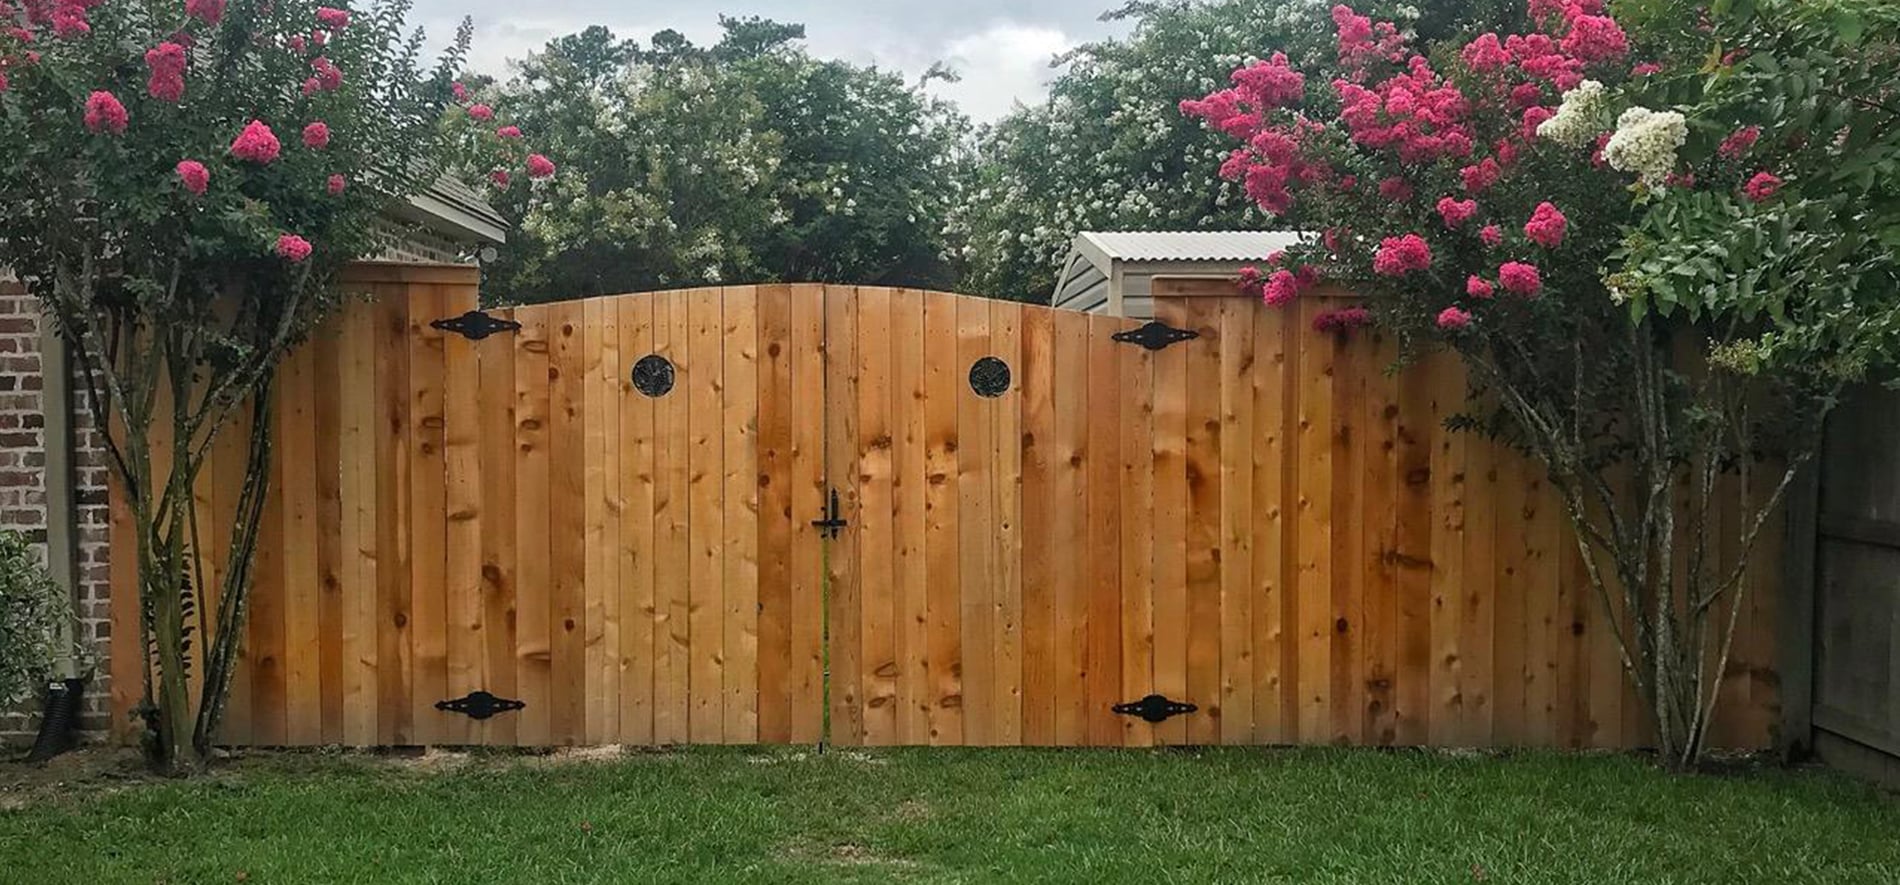 capped fence with arch gate and portholes AFTER